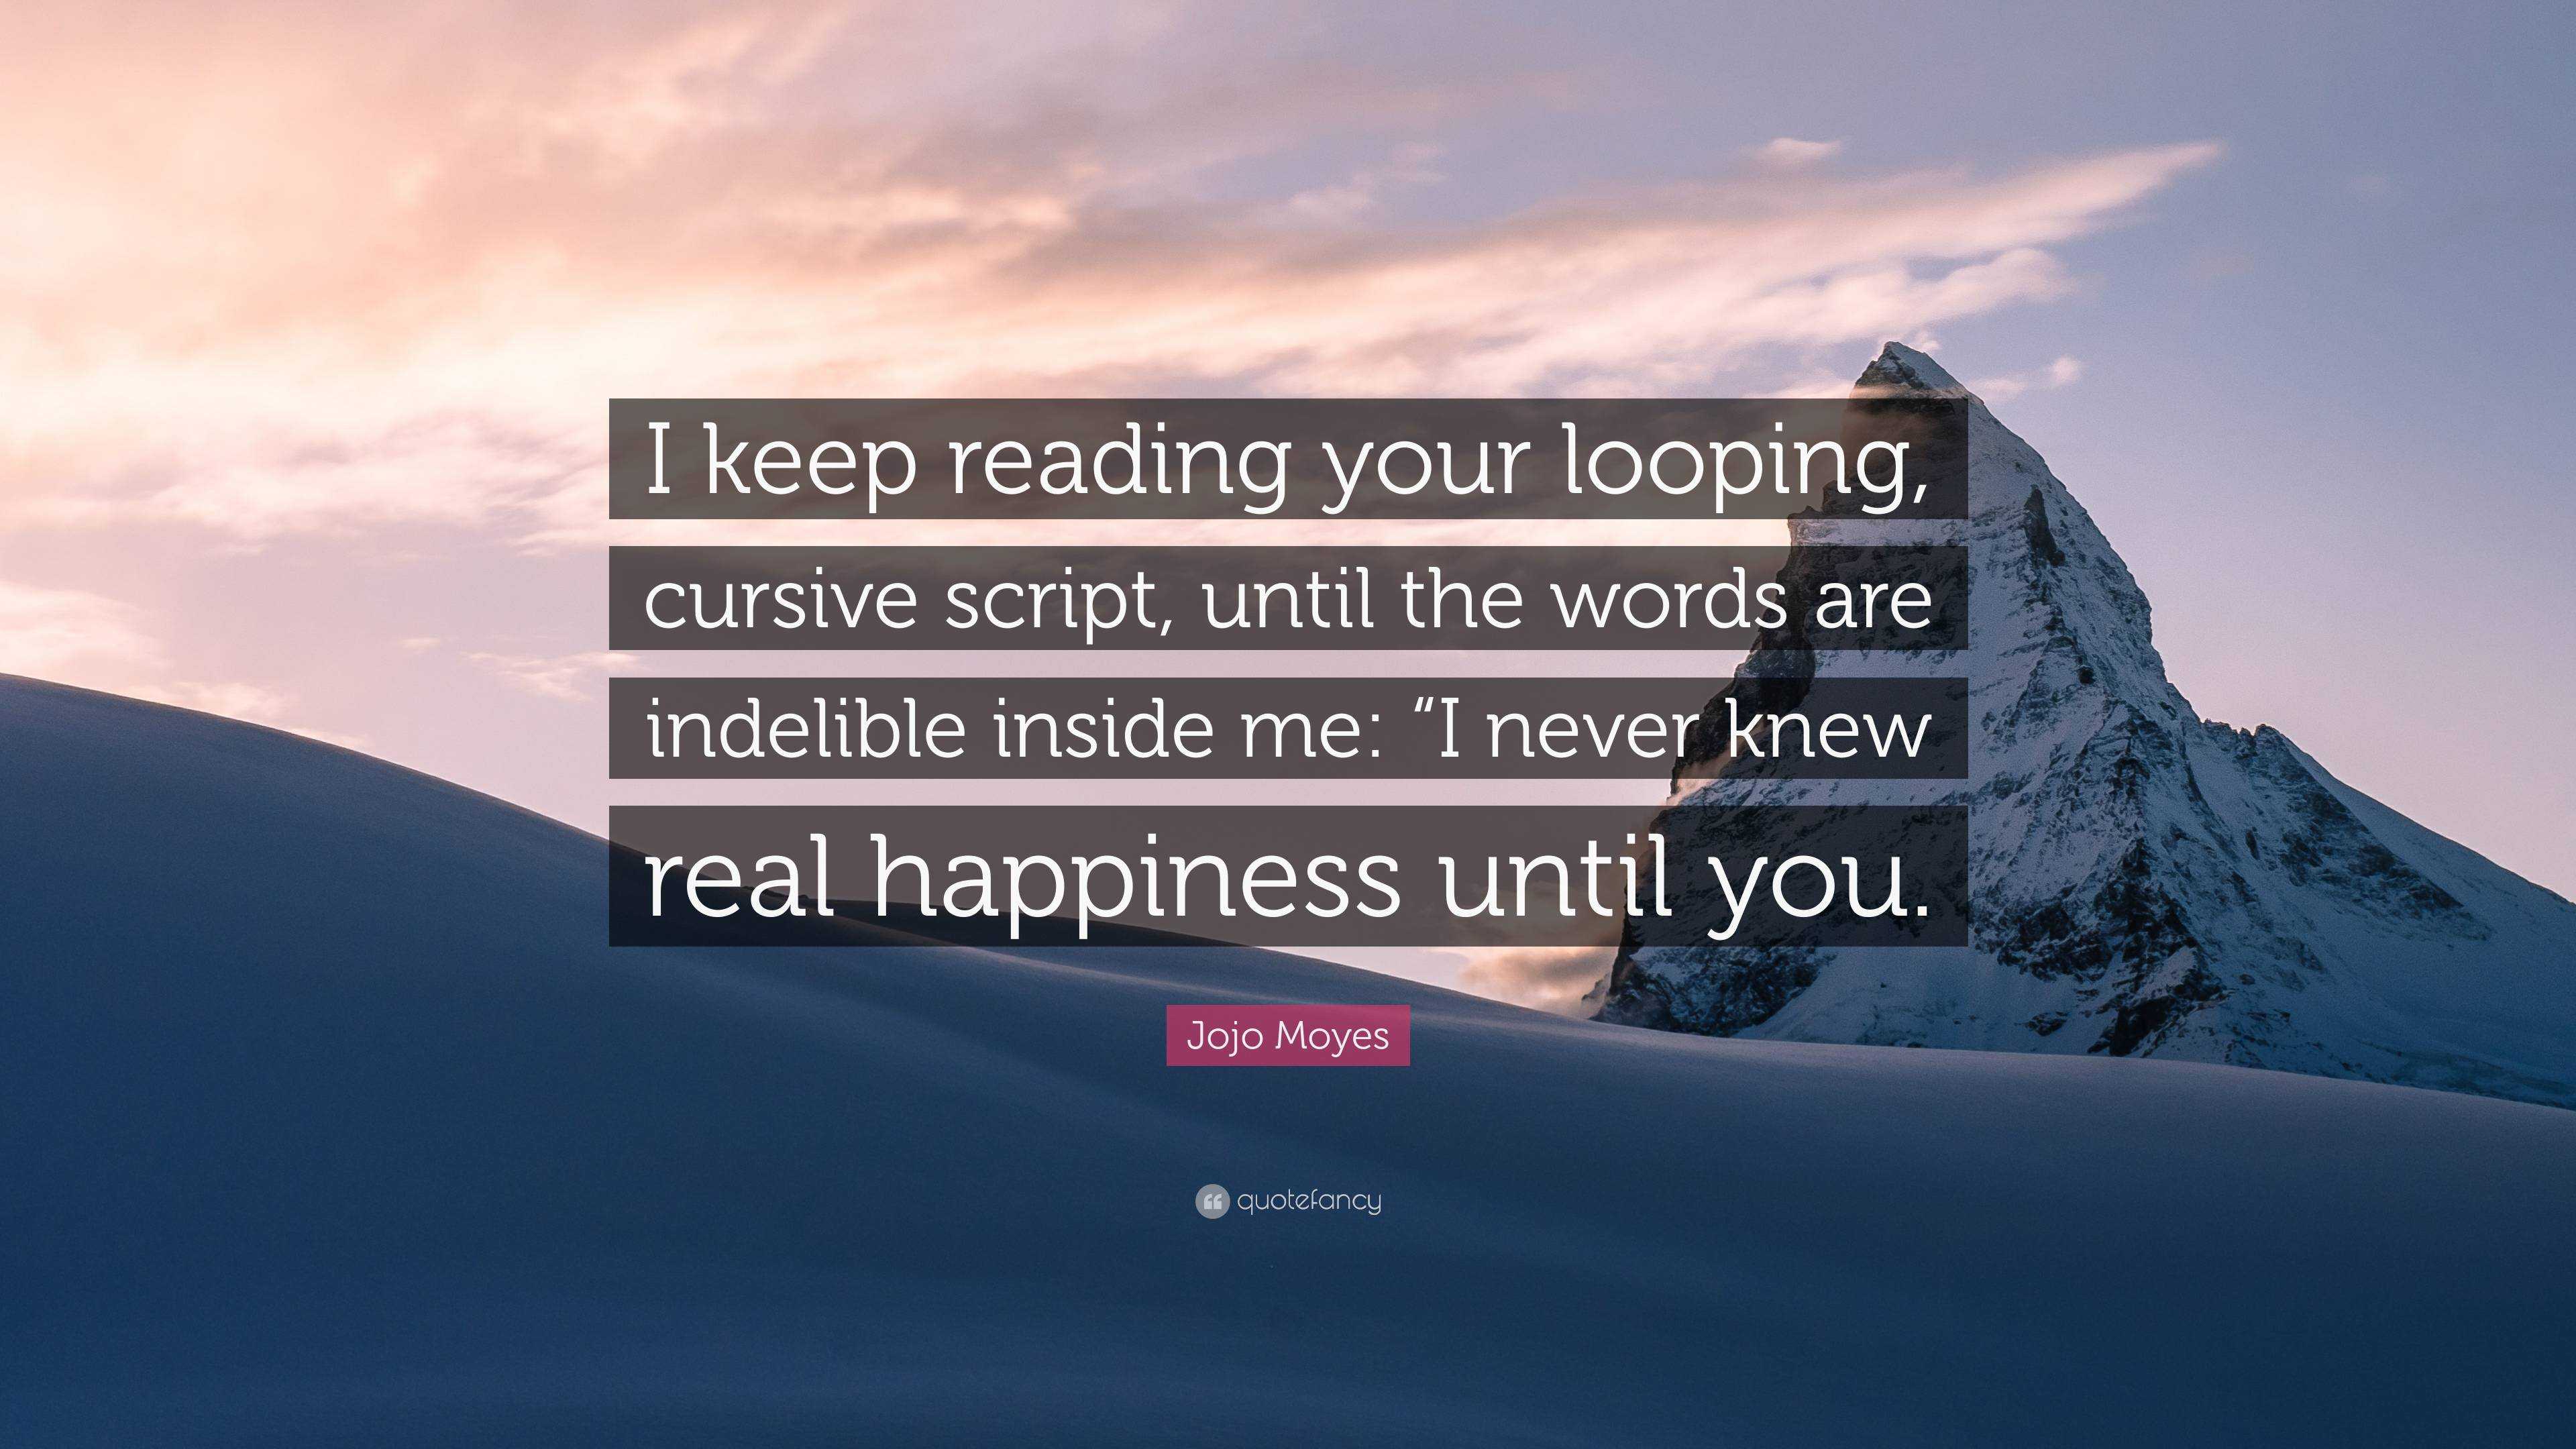 Jojo Moyes Quote “i Keep Reading Your Looping Cursive Script Until The Words Are Indelible 5288